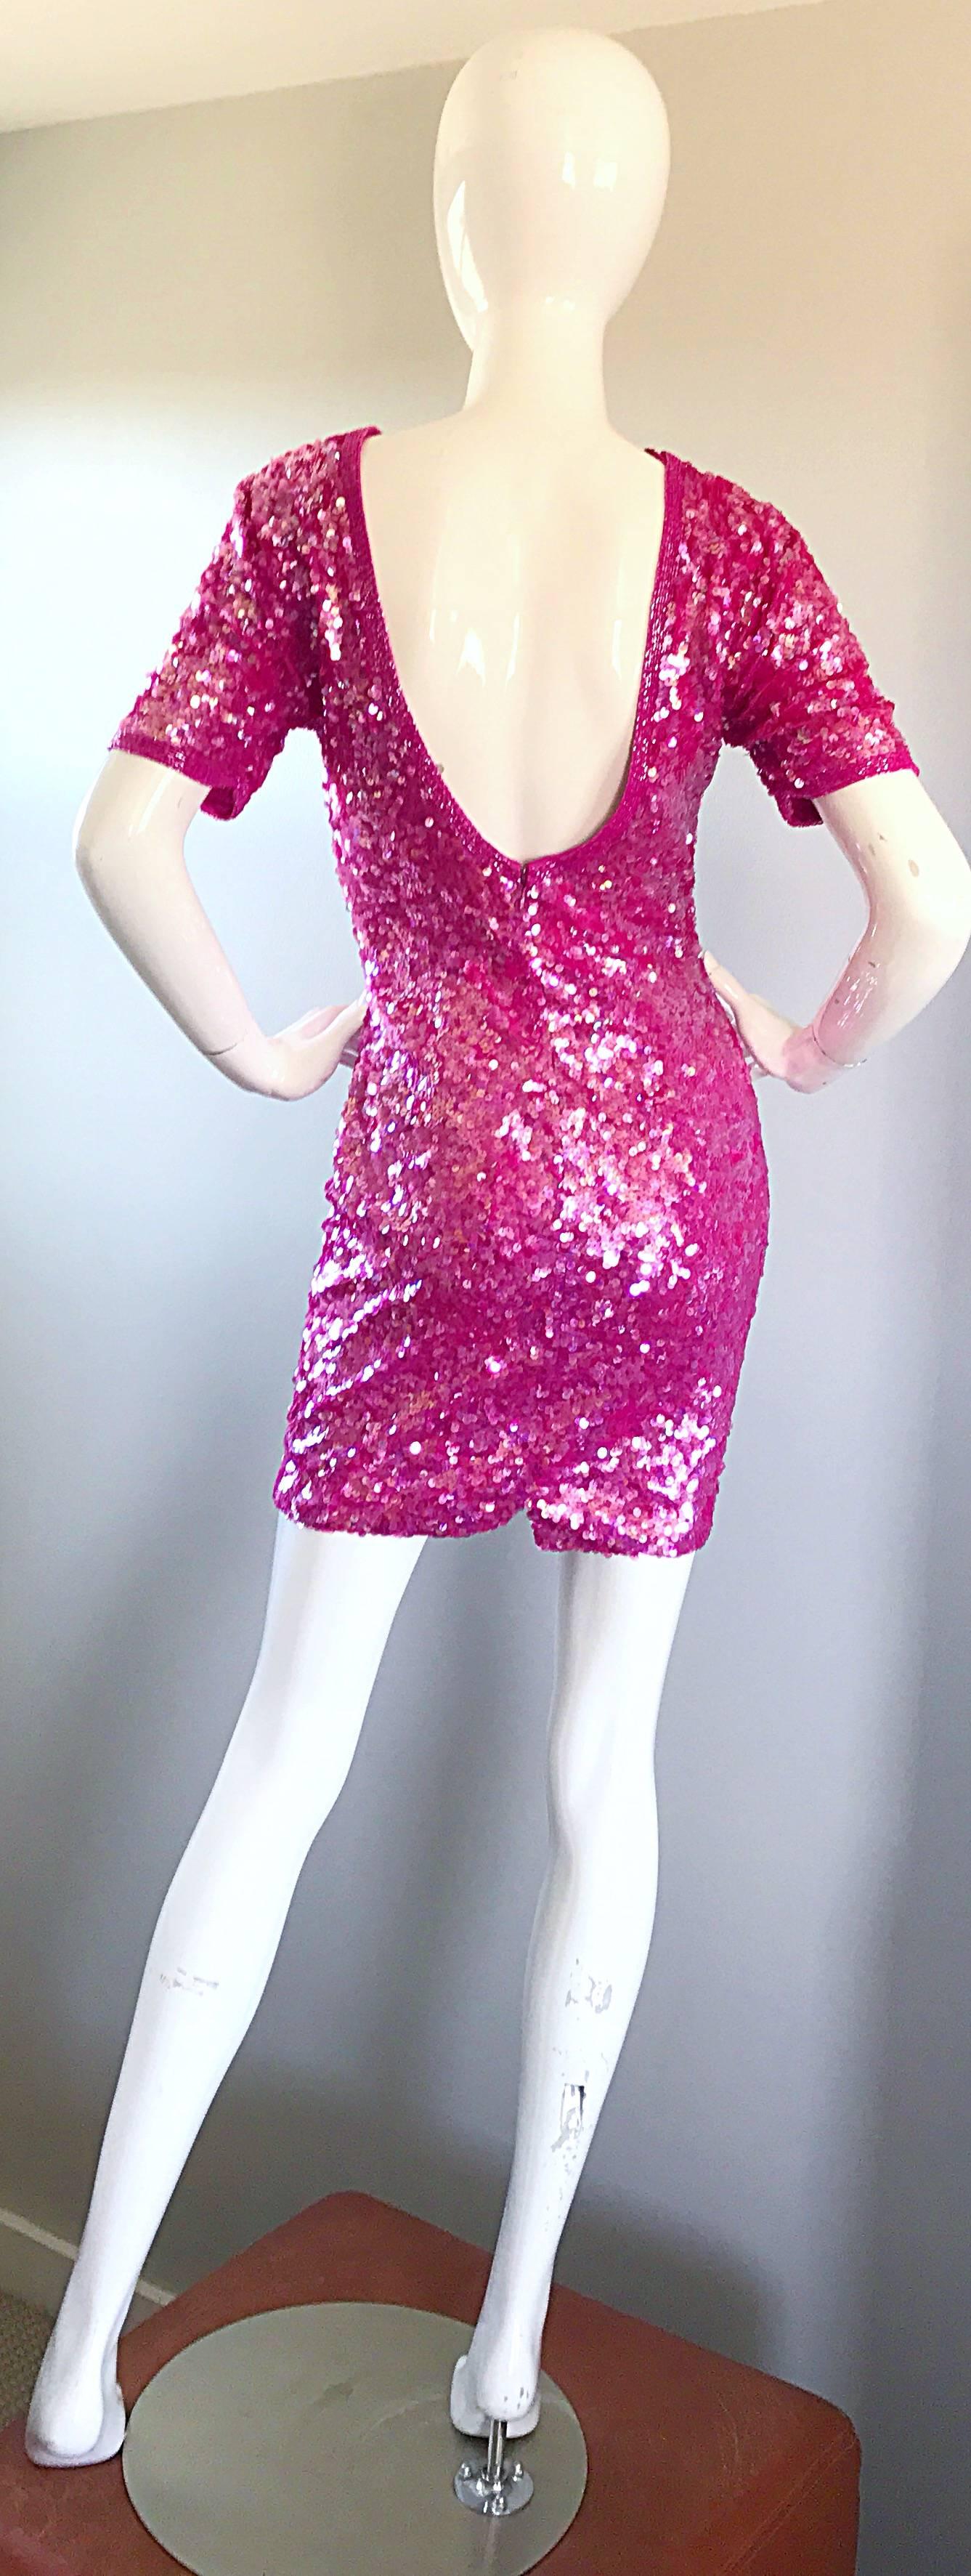 Incredible Vintage Lillie Rubin 1990s Hot Pink Fully Sequined 90s Mini Dress For Sale 2